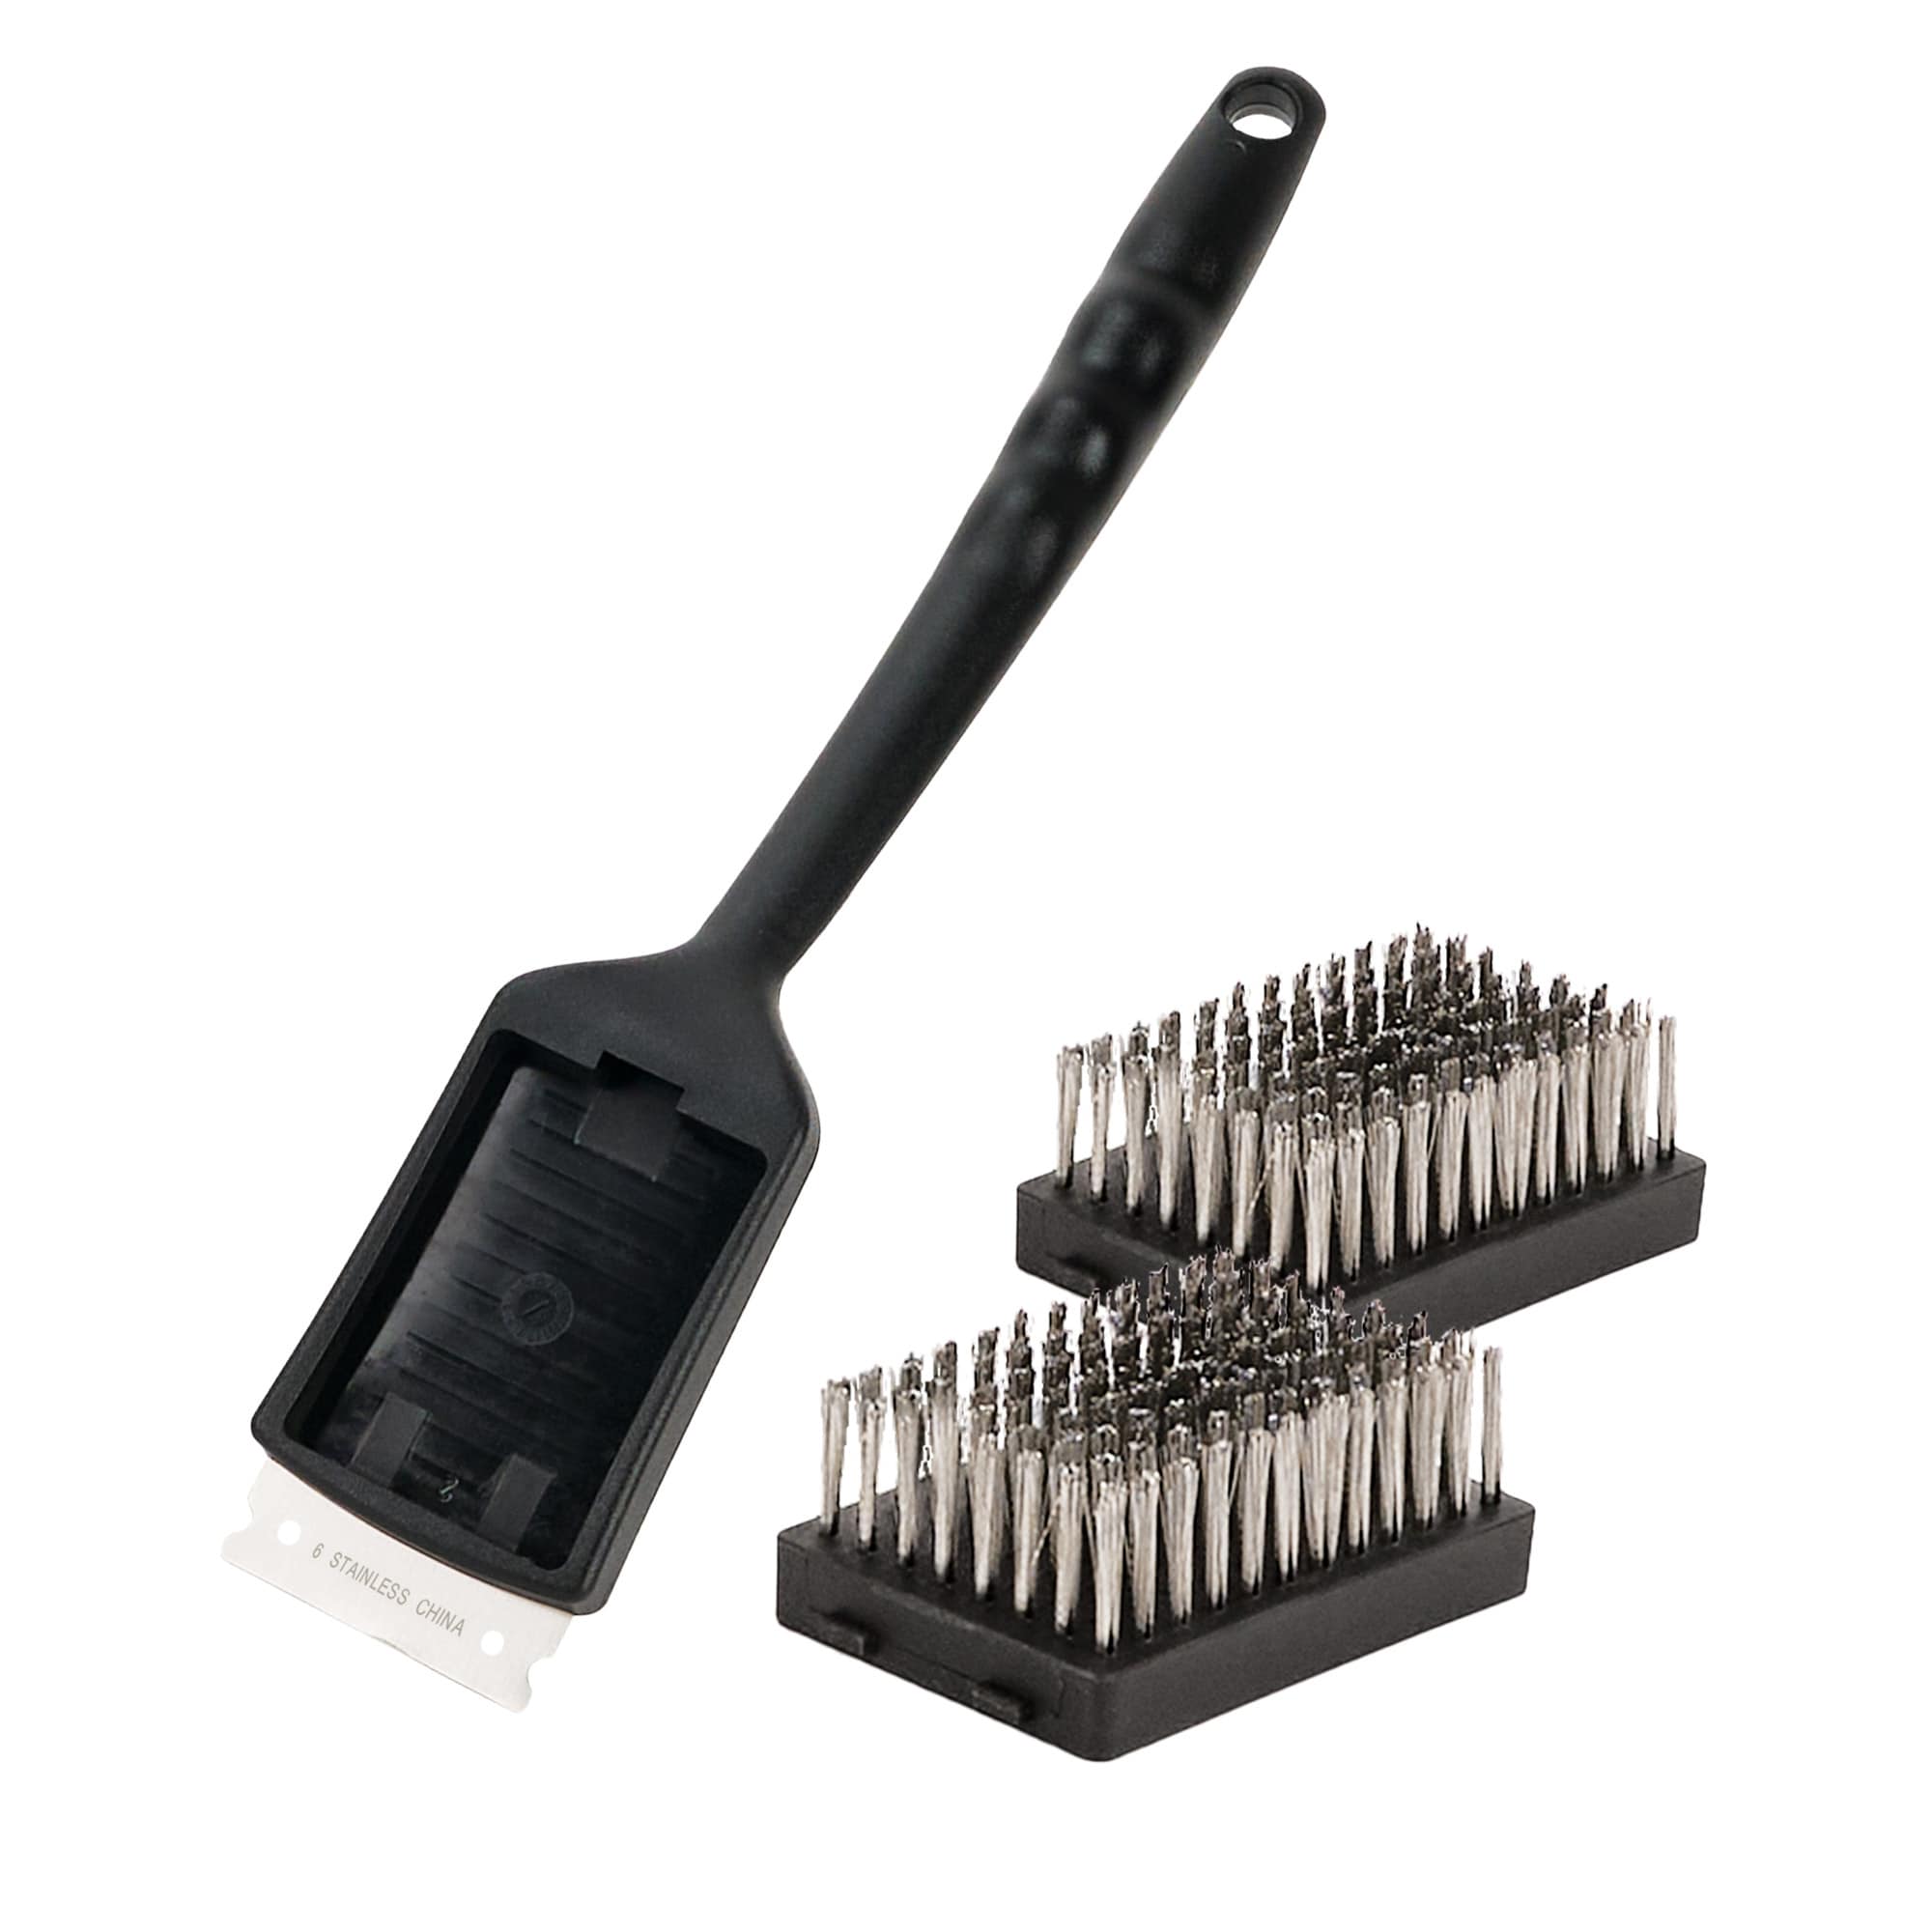 2 Packs Grill Brush for Outdoor Grill. Safe Stainless Steel BBQ Accessories  for Grill Cleaning. 3 Hooks Included.